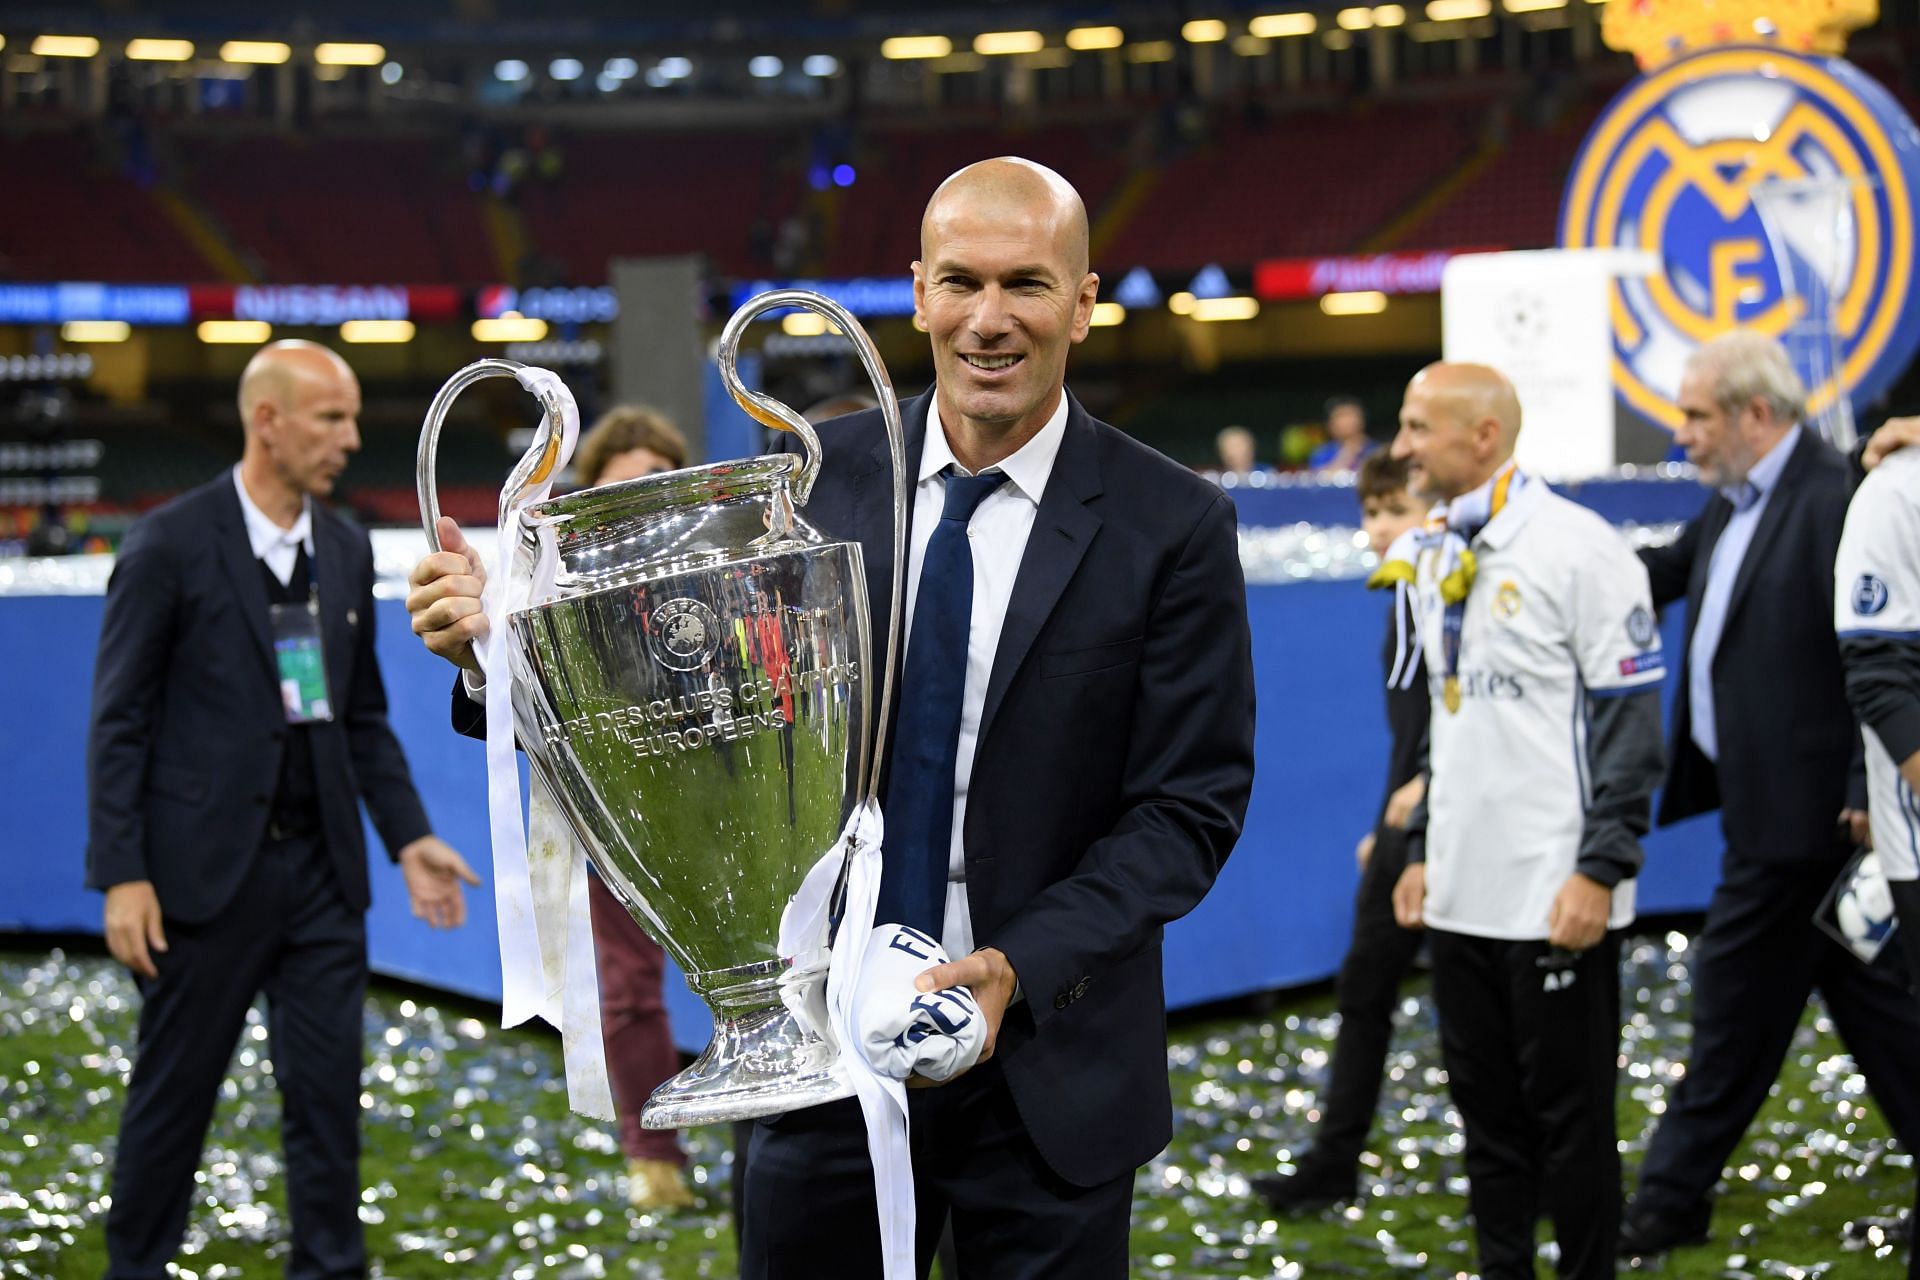 Jude Bellingham is inspired by Madrid icon Zidane (in pic).